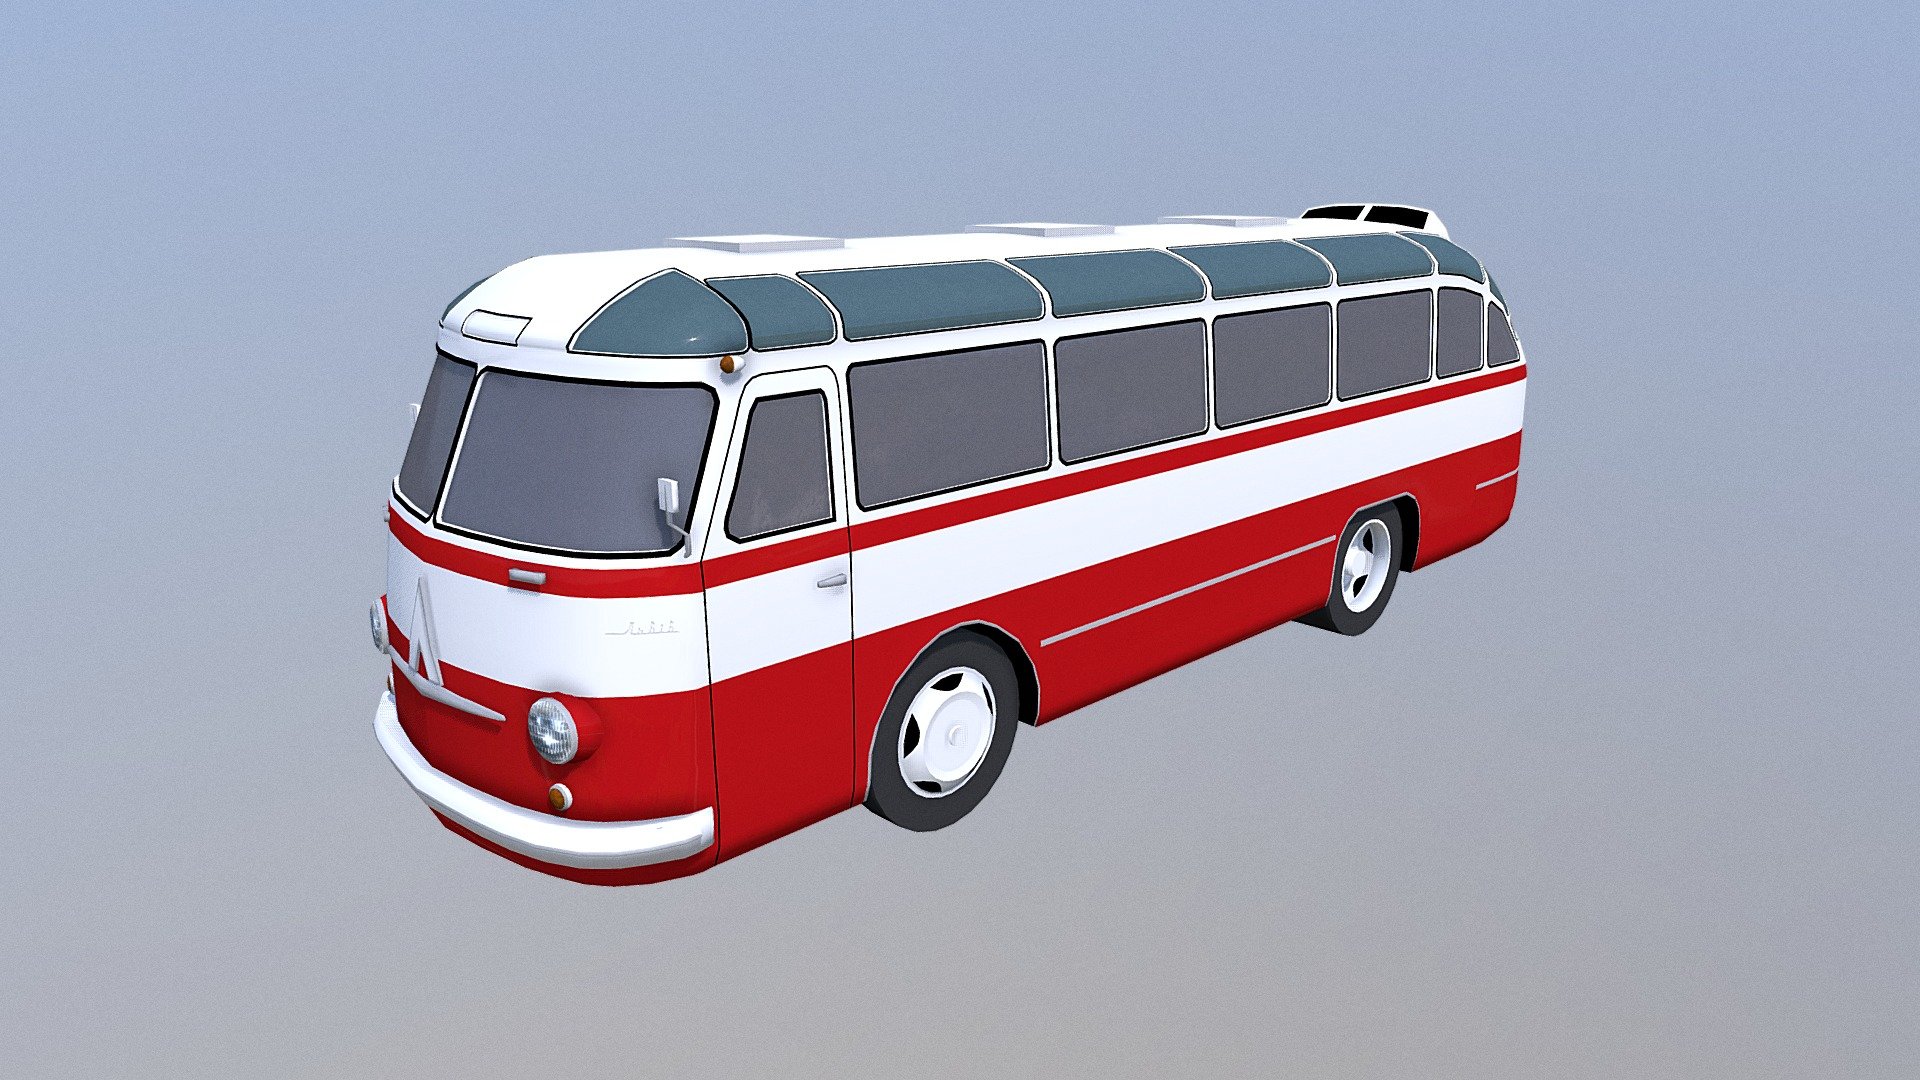 Asset for Cities Skylines. LAZ-695B was developed at the plant LAZ in Lviv in 1957-1964. Soviet city bus of the middle of the twentieth century 3d model